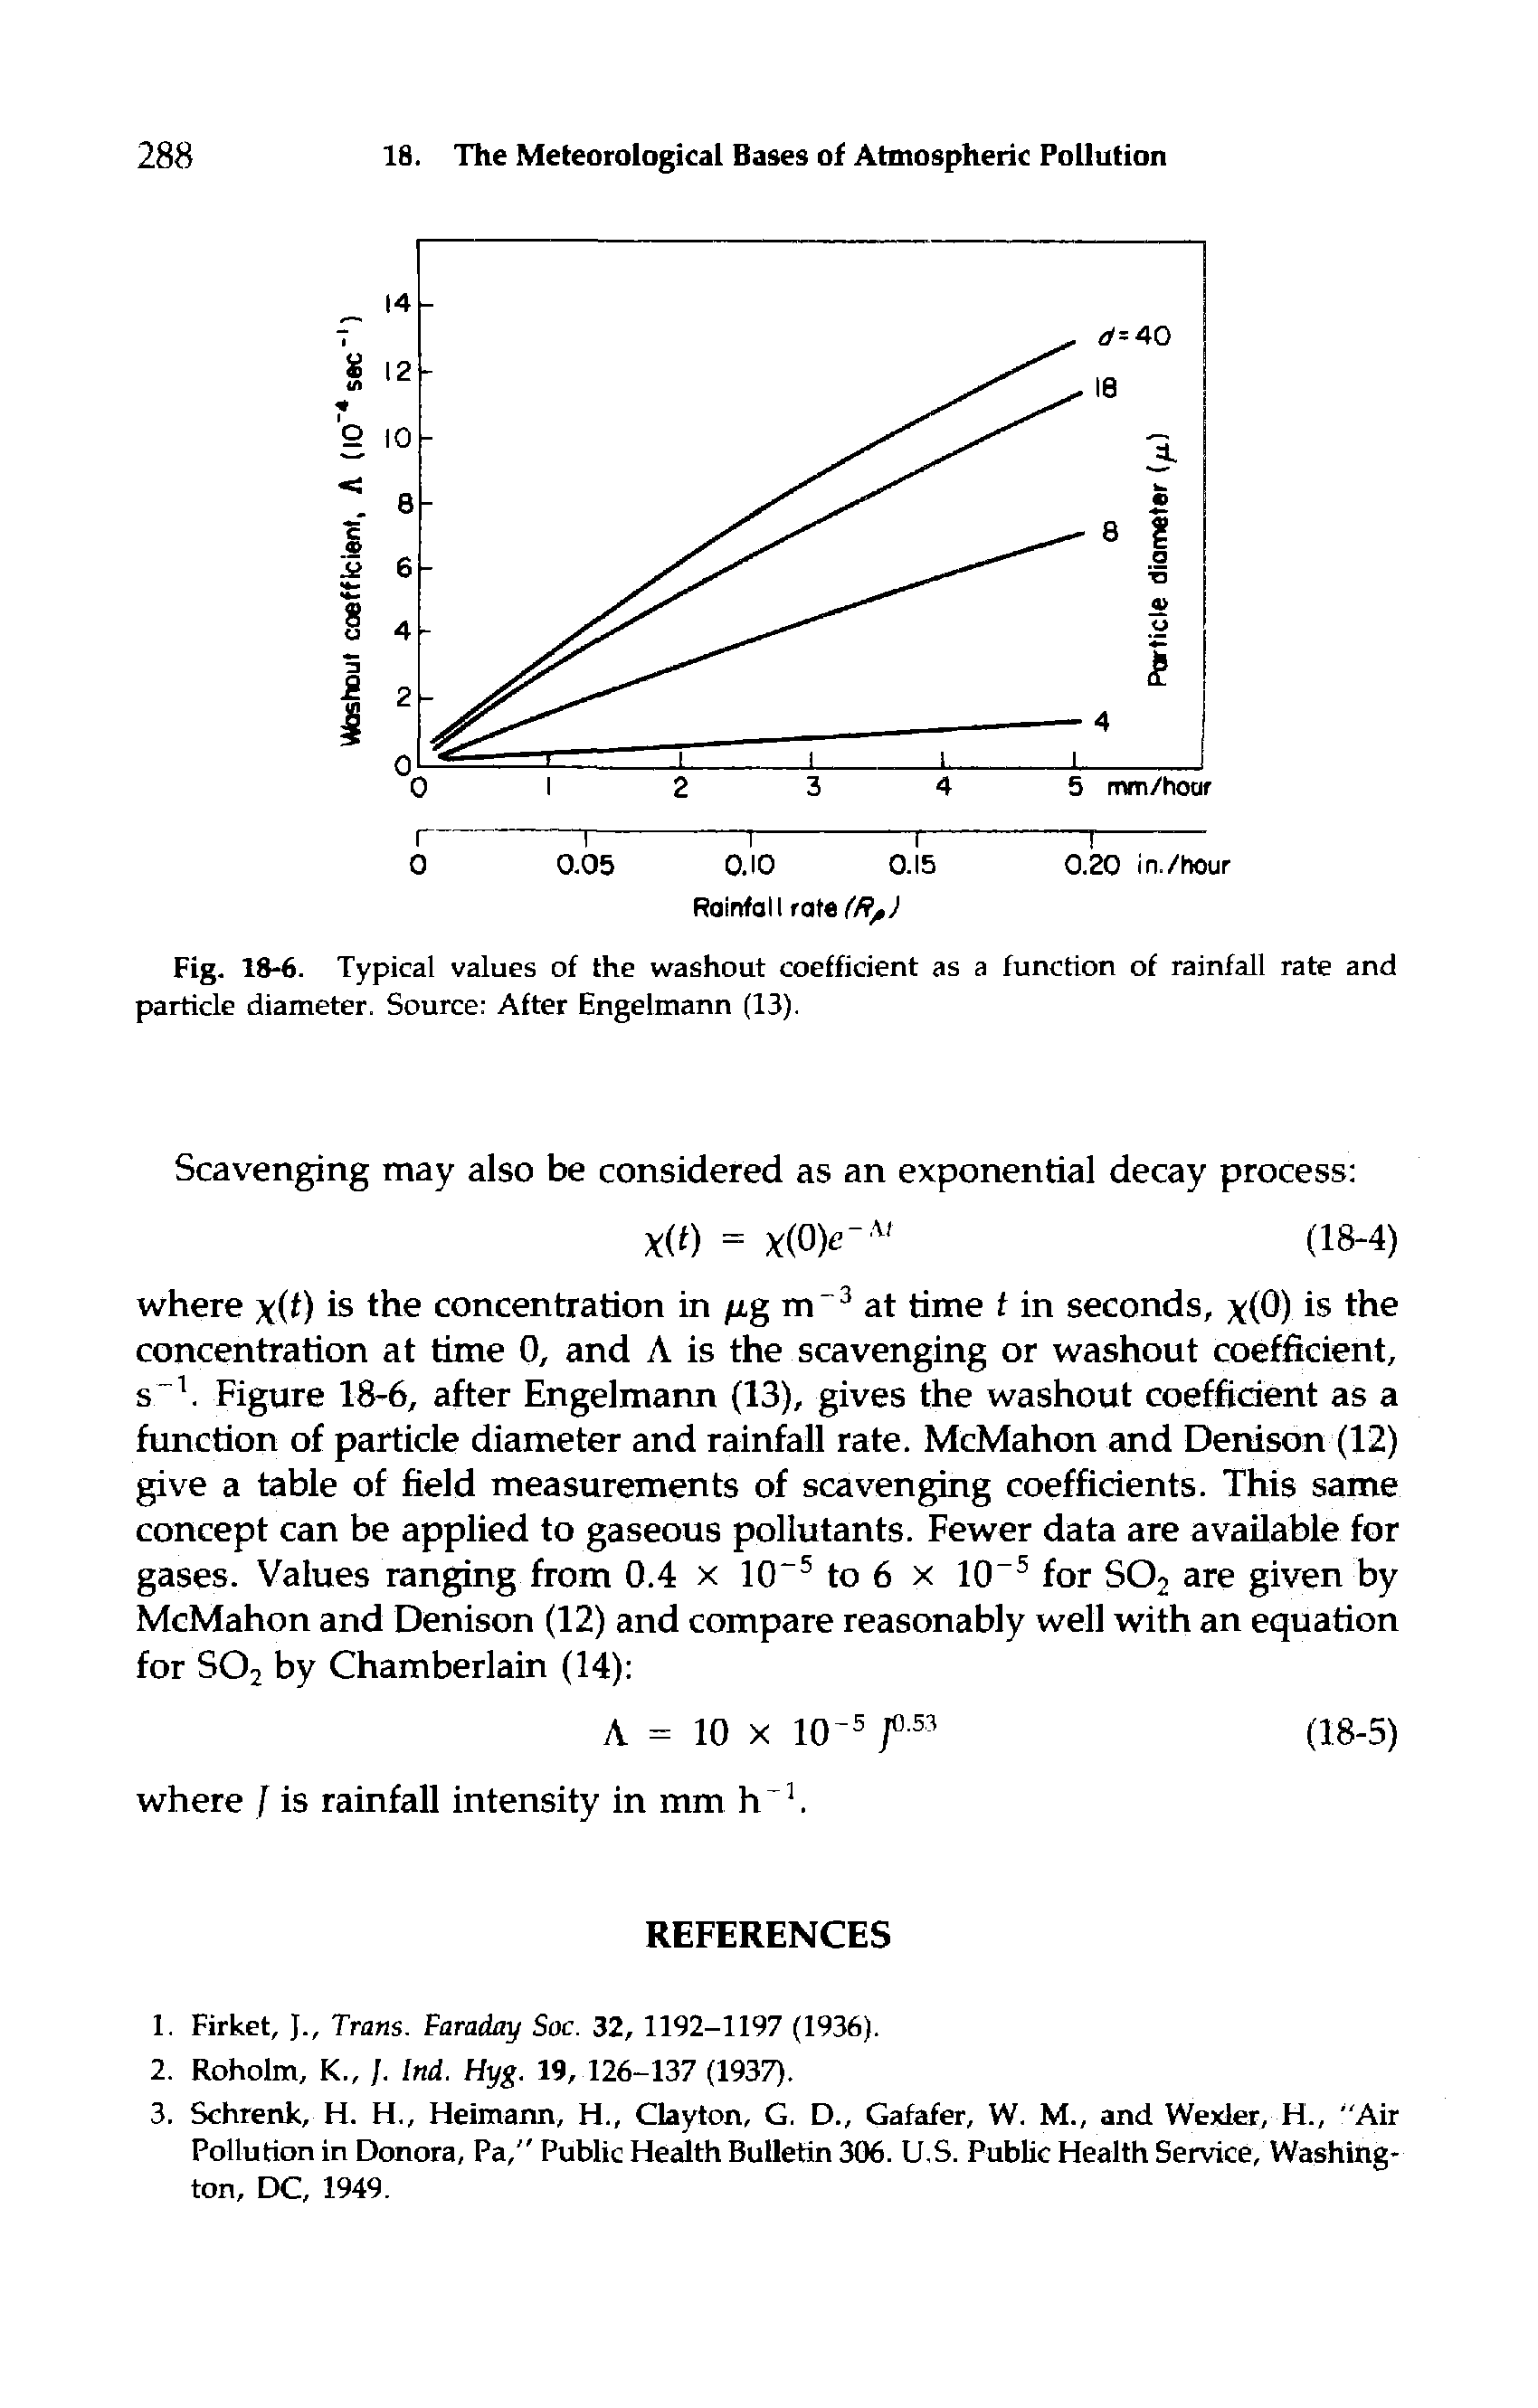 Fig. 18-6. Typical values of the washout coefficient as a function of rainfall rate and particle diameter. Source After Engelmann (13).